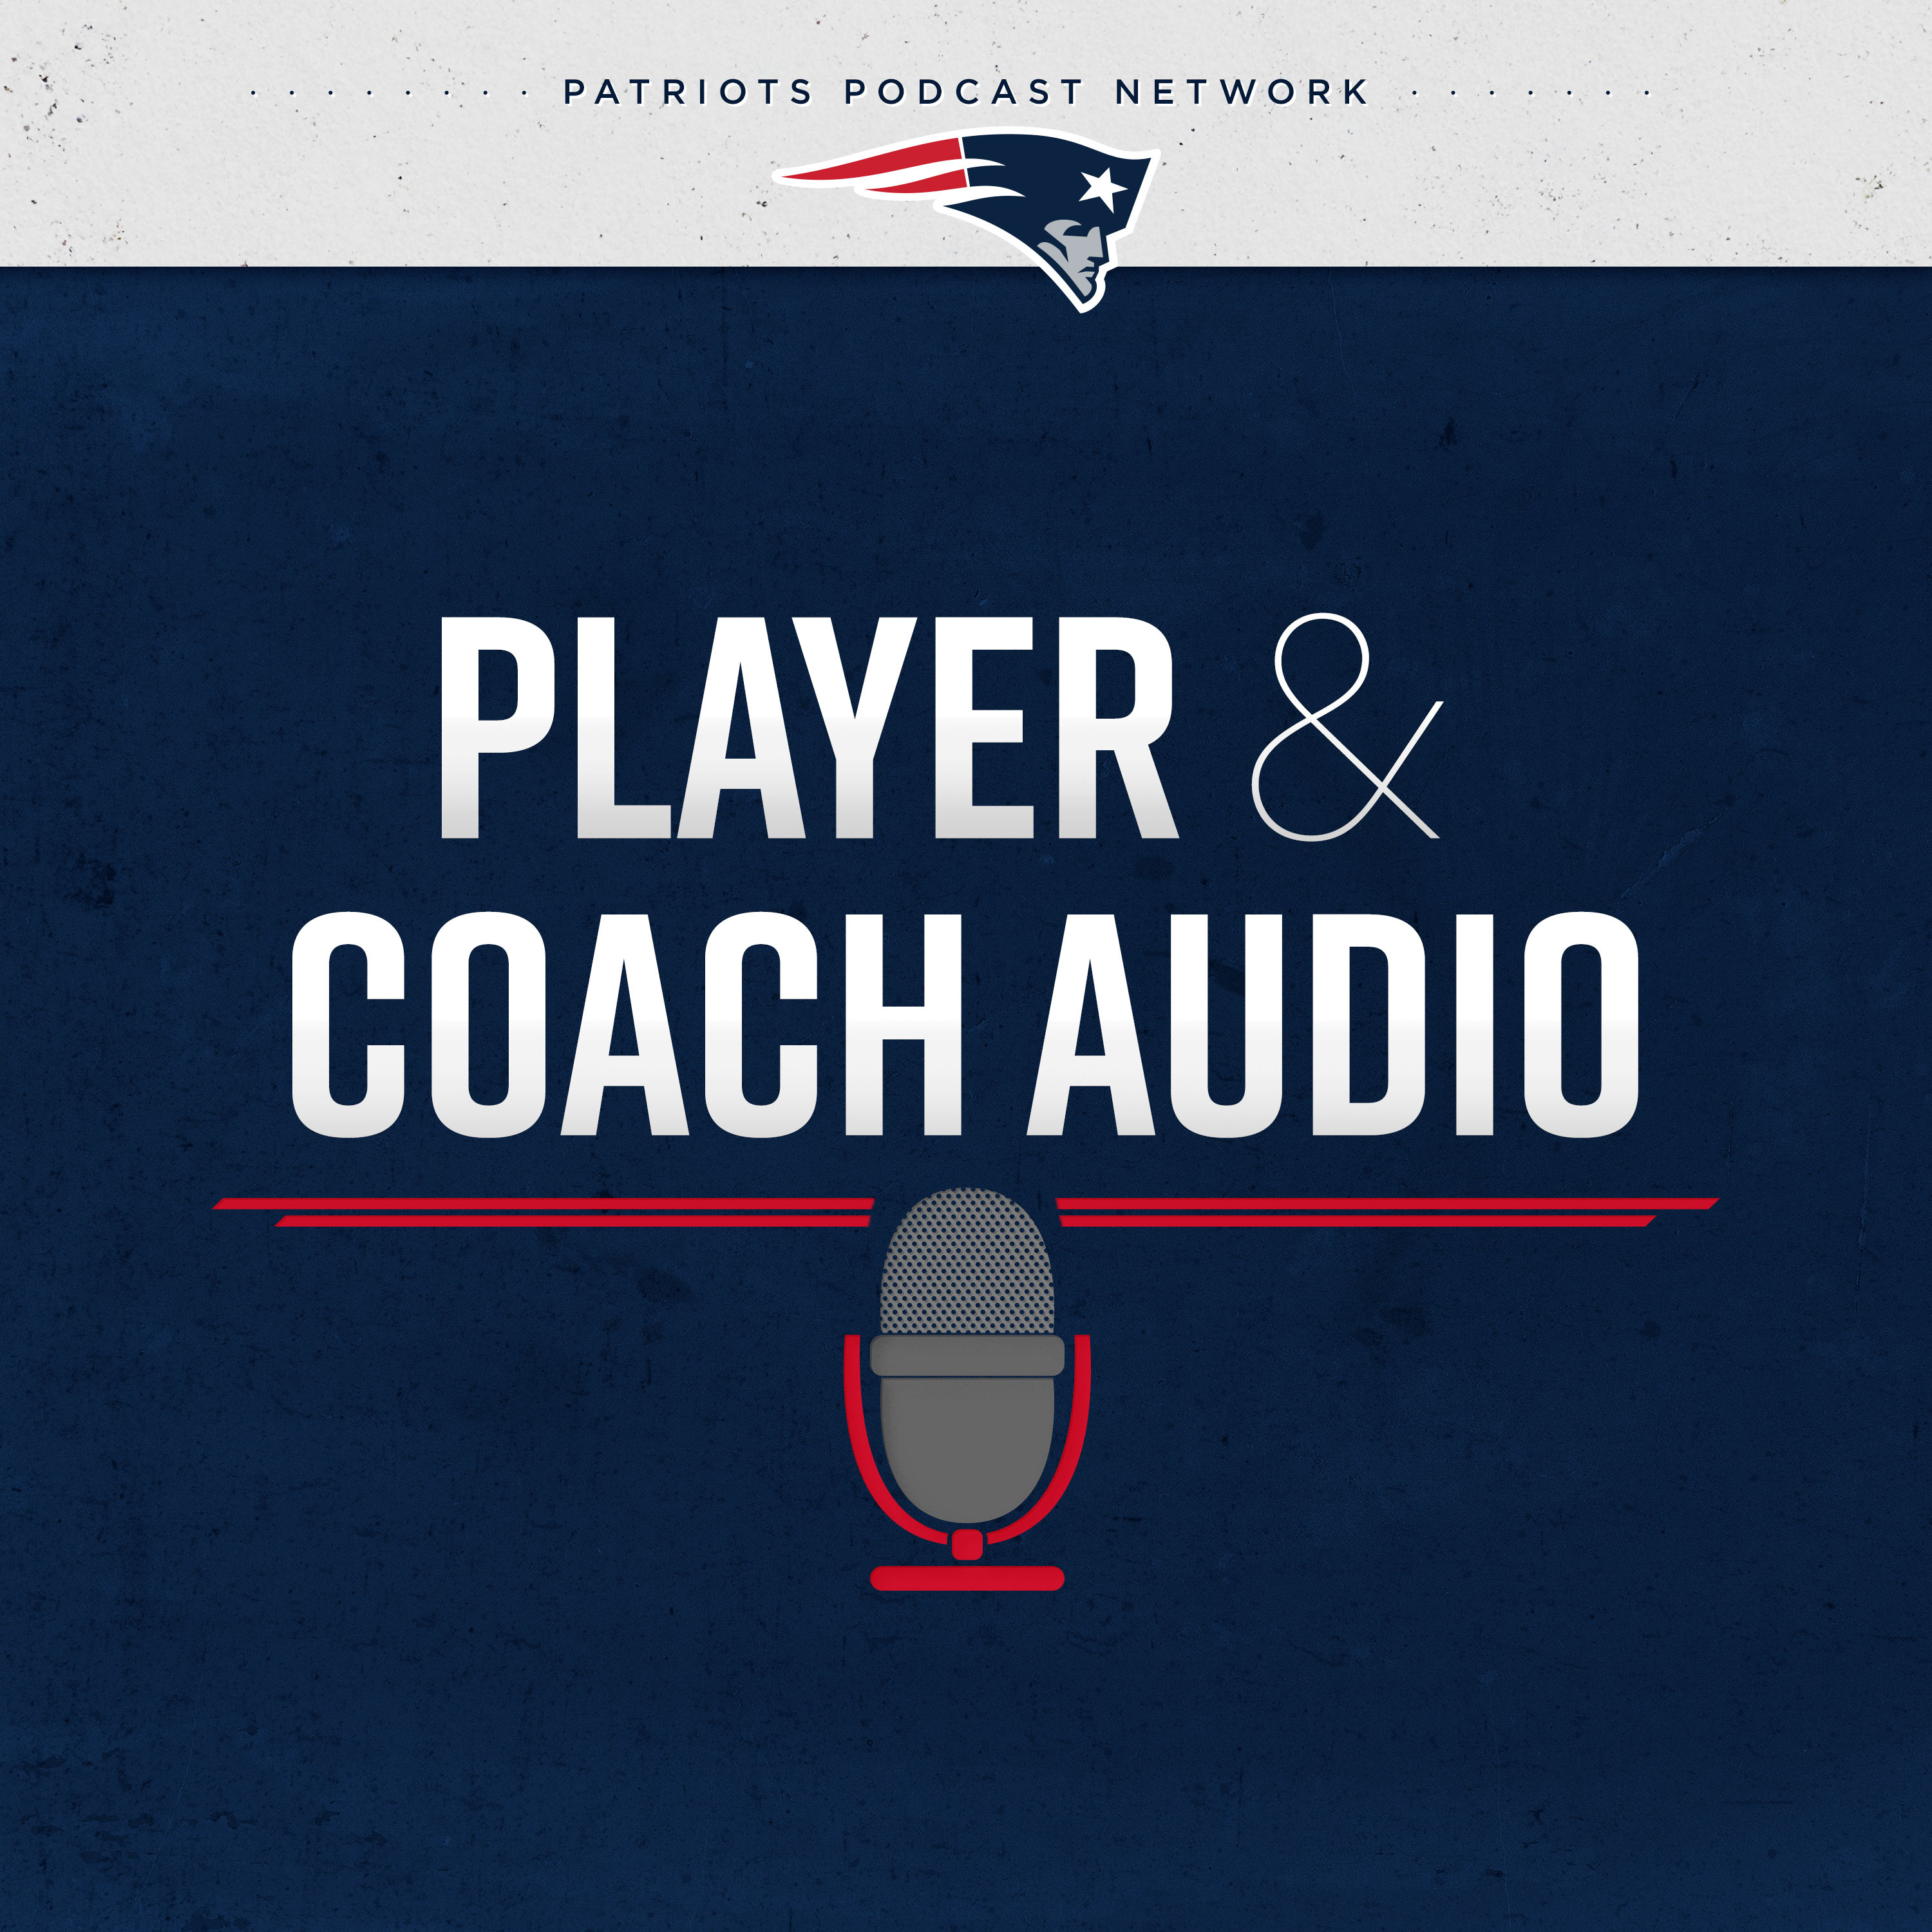 Josh McDaniels 1/11: "We are hard at work right now trying to put in the best plan we can"